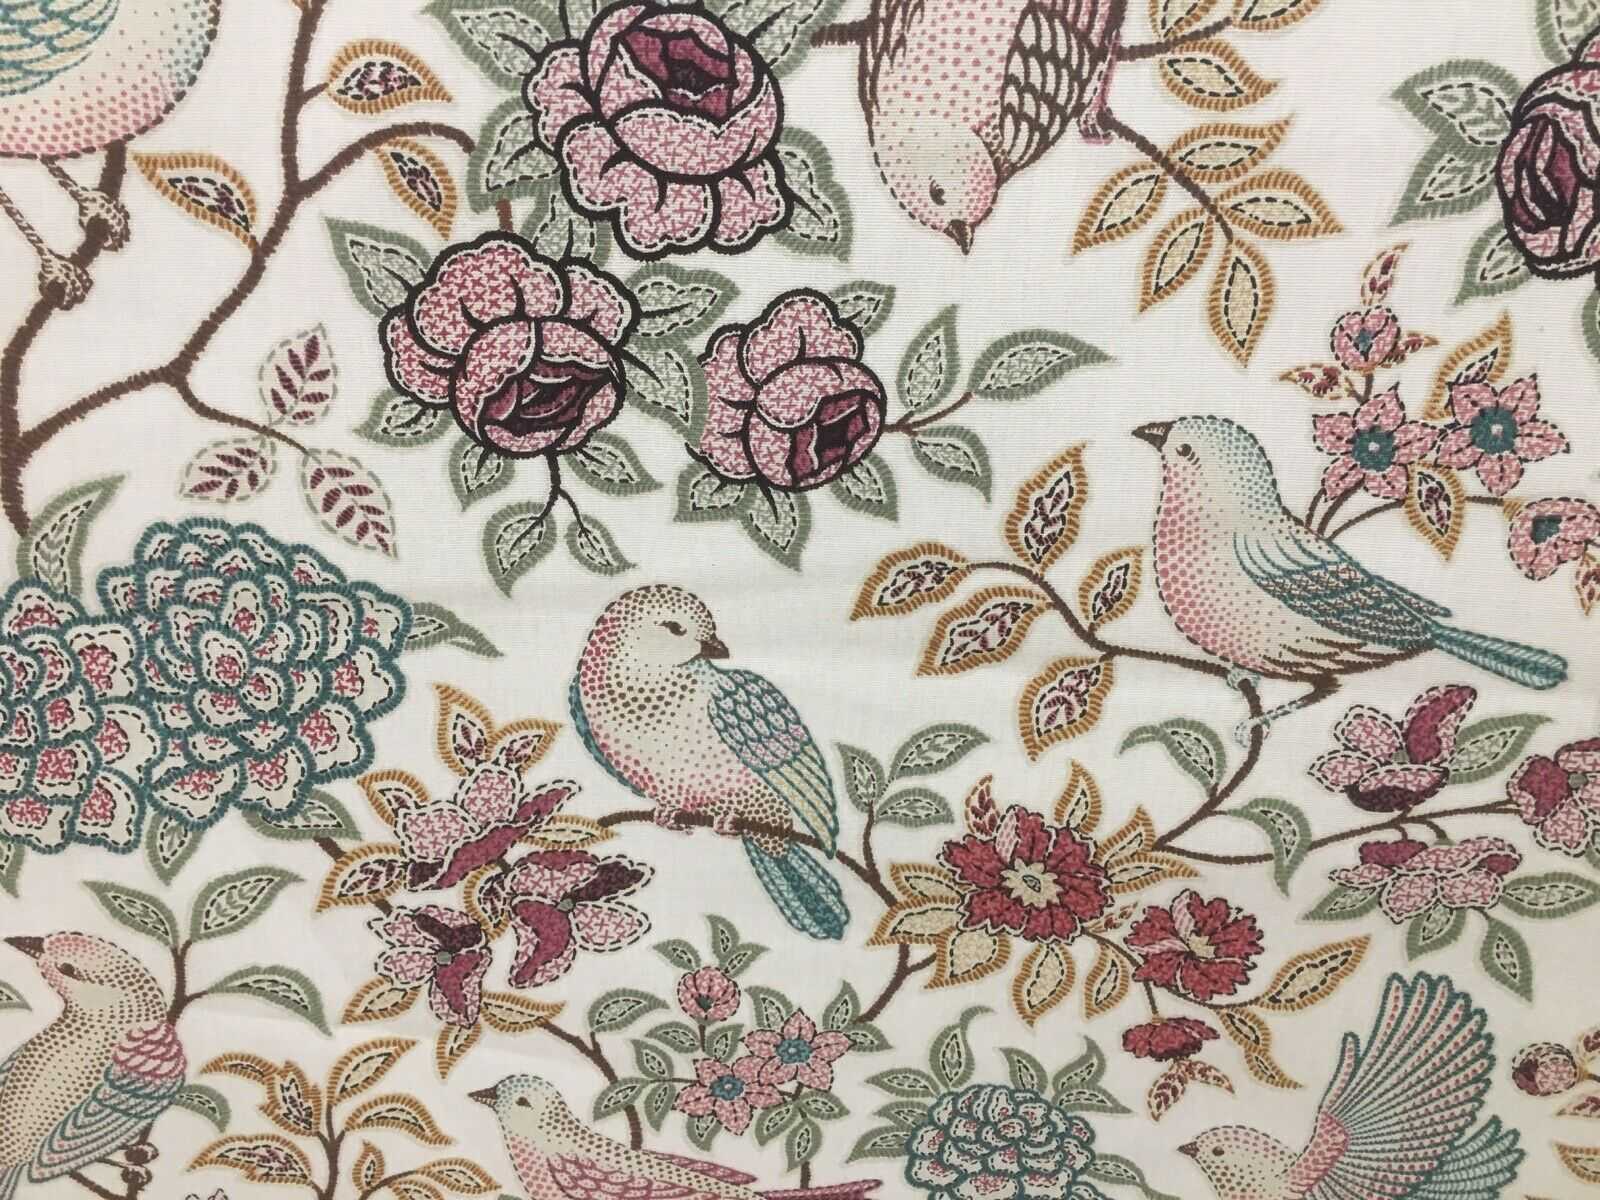 Heritage Dove Fern Fabric for Curtain